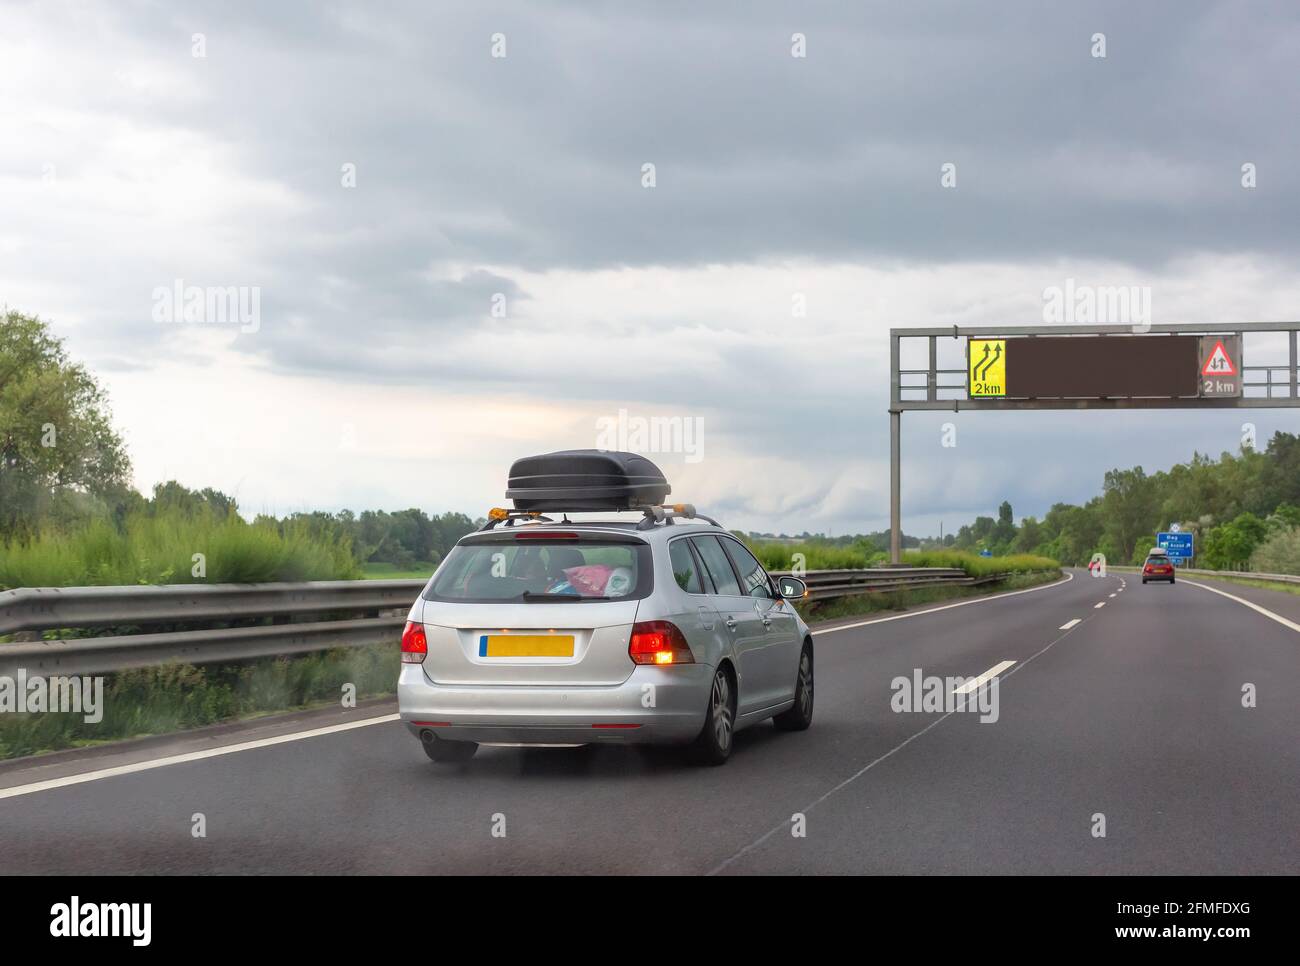 Silver car with black roof luggage box driving on the road Stock Photo